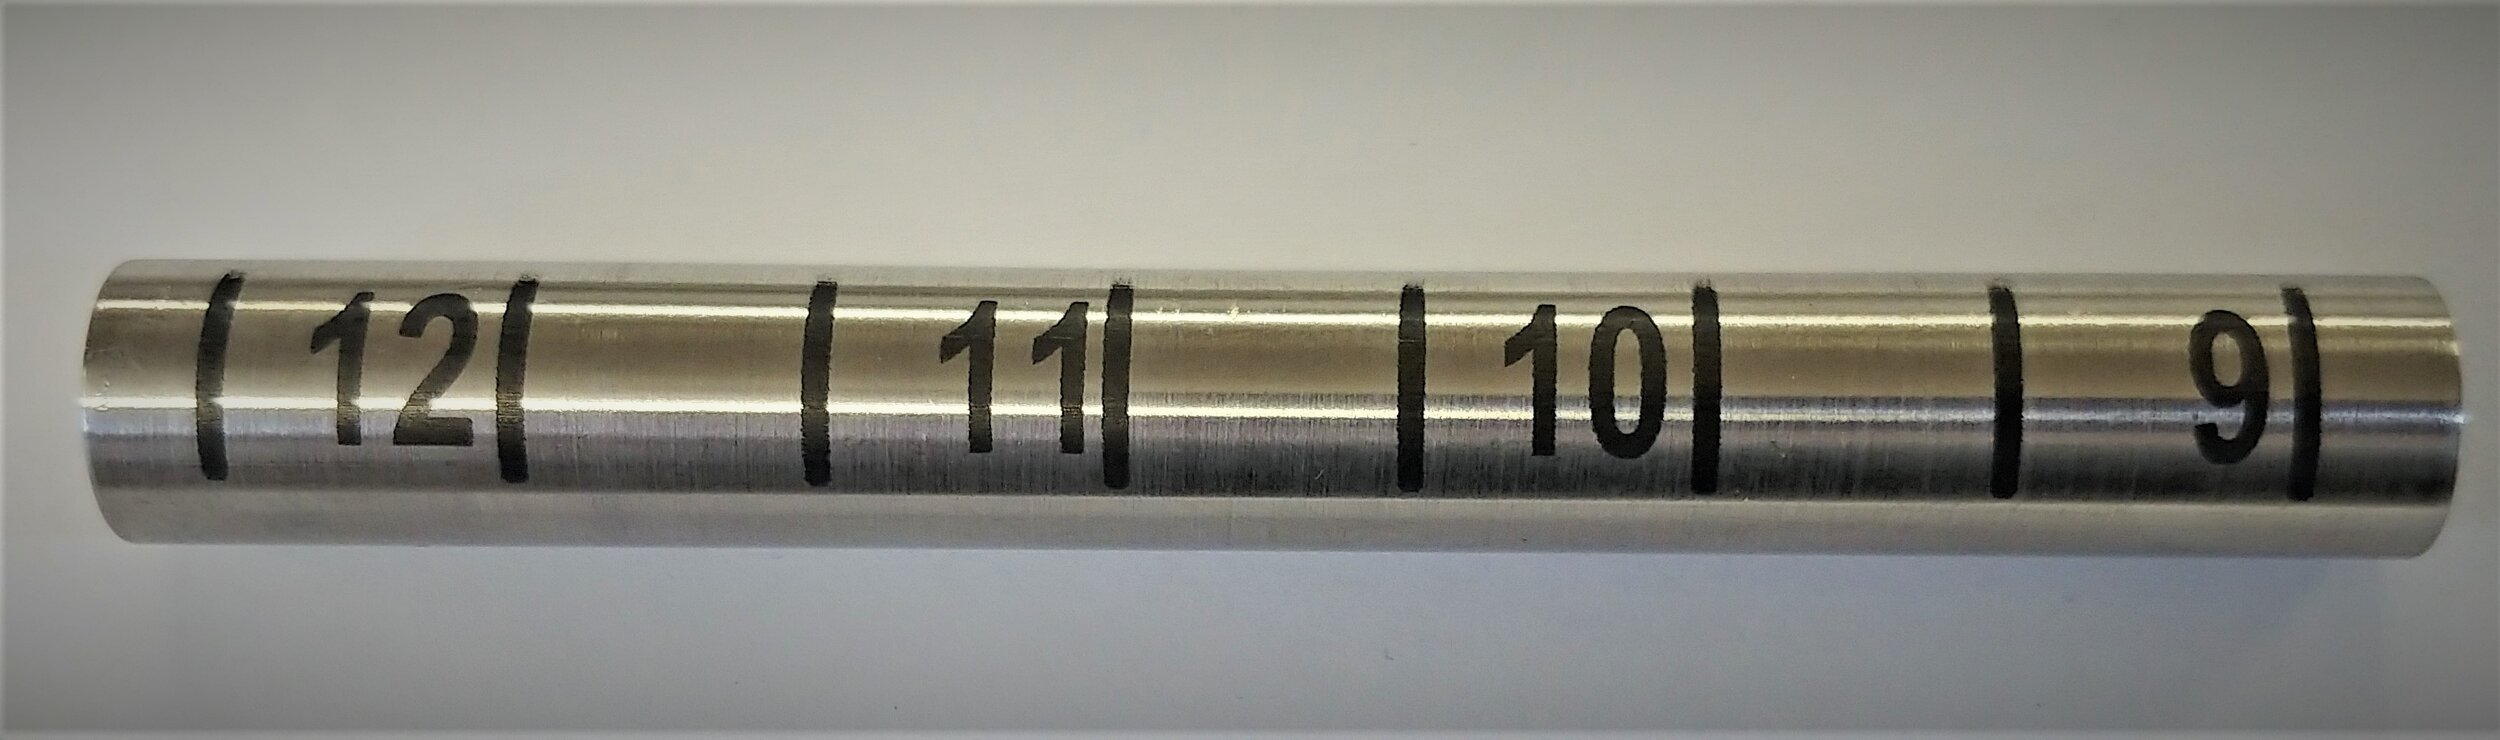 steel tube with laser marking